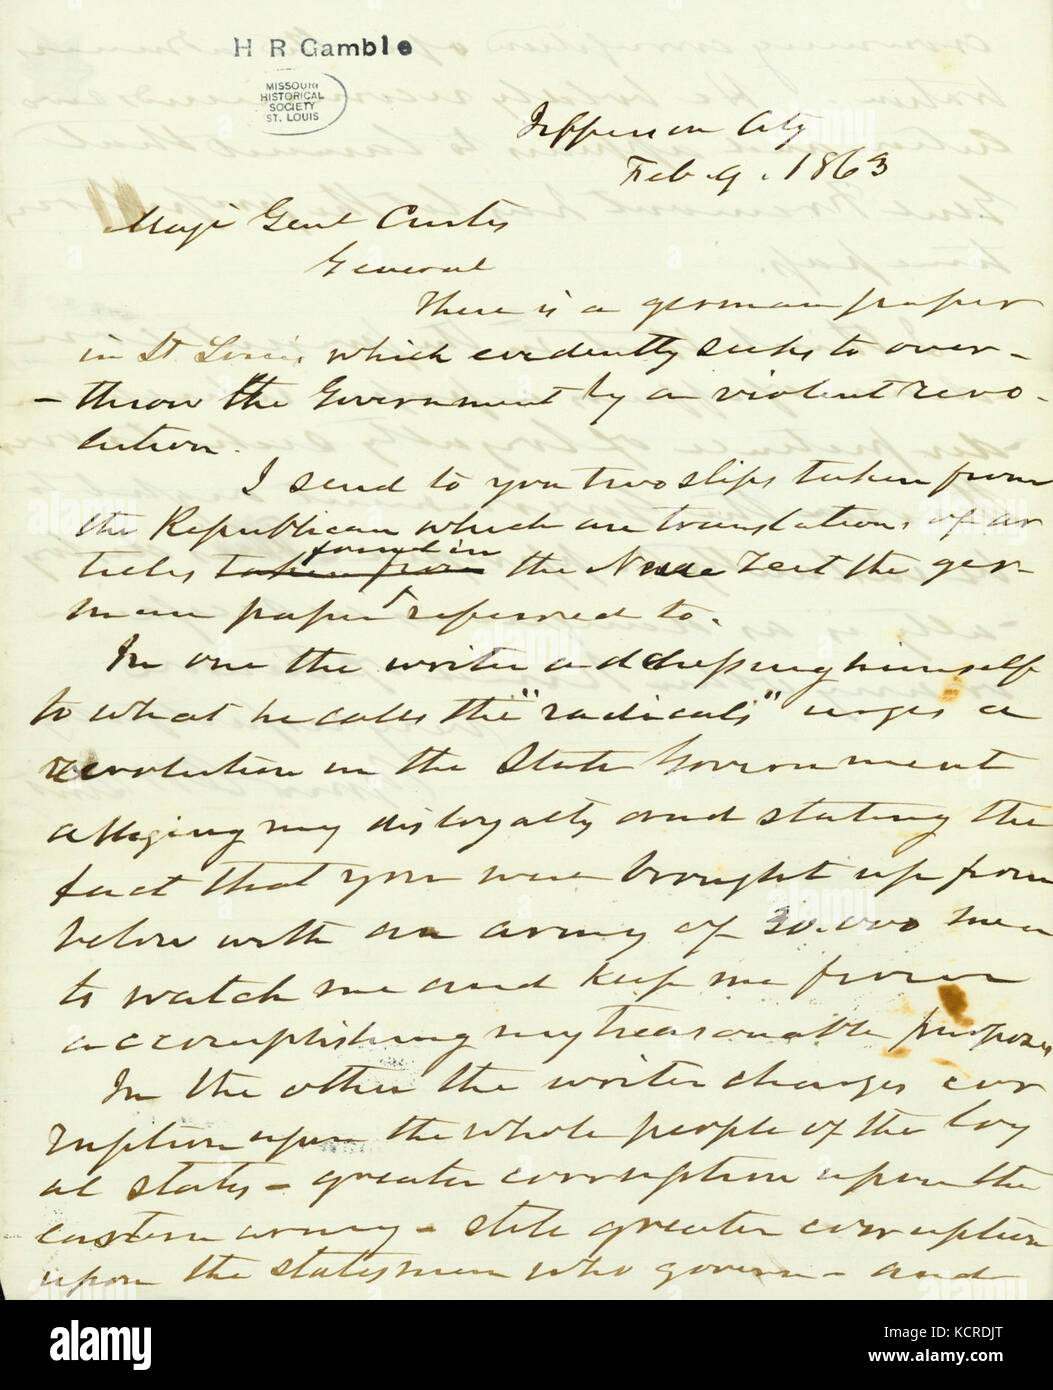 Contemporary copy of unsigned letter, Jefferson City, to Maj. Gen. Curtis (Samuel R. Curtis), February 9, 1863 Stock Photo